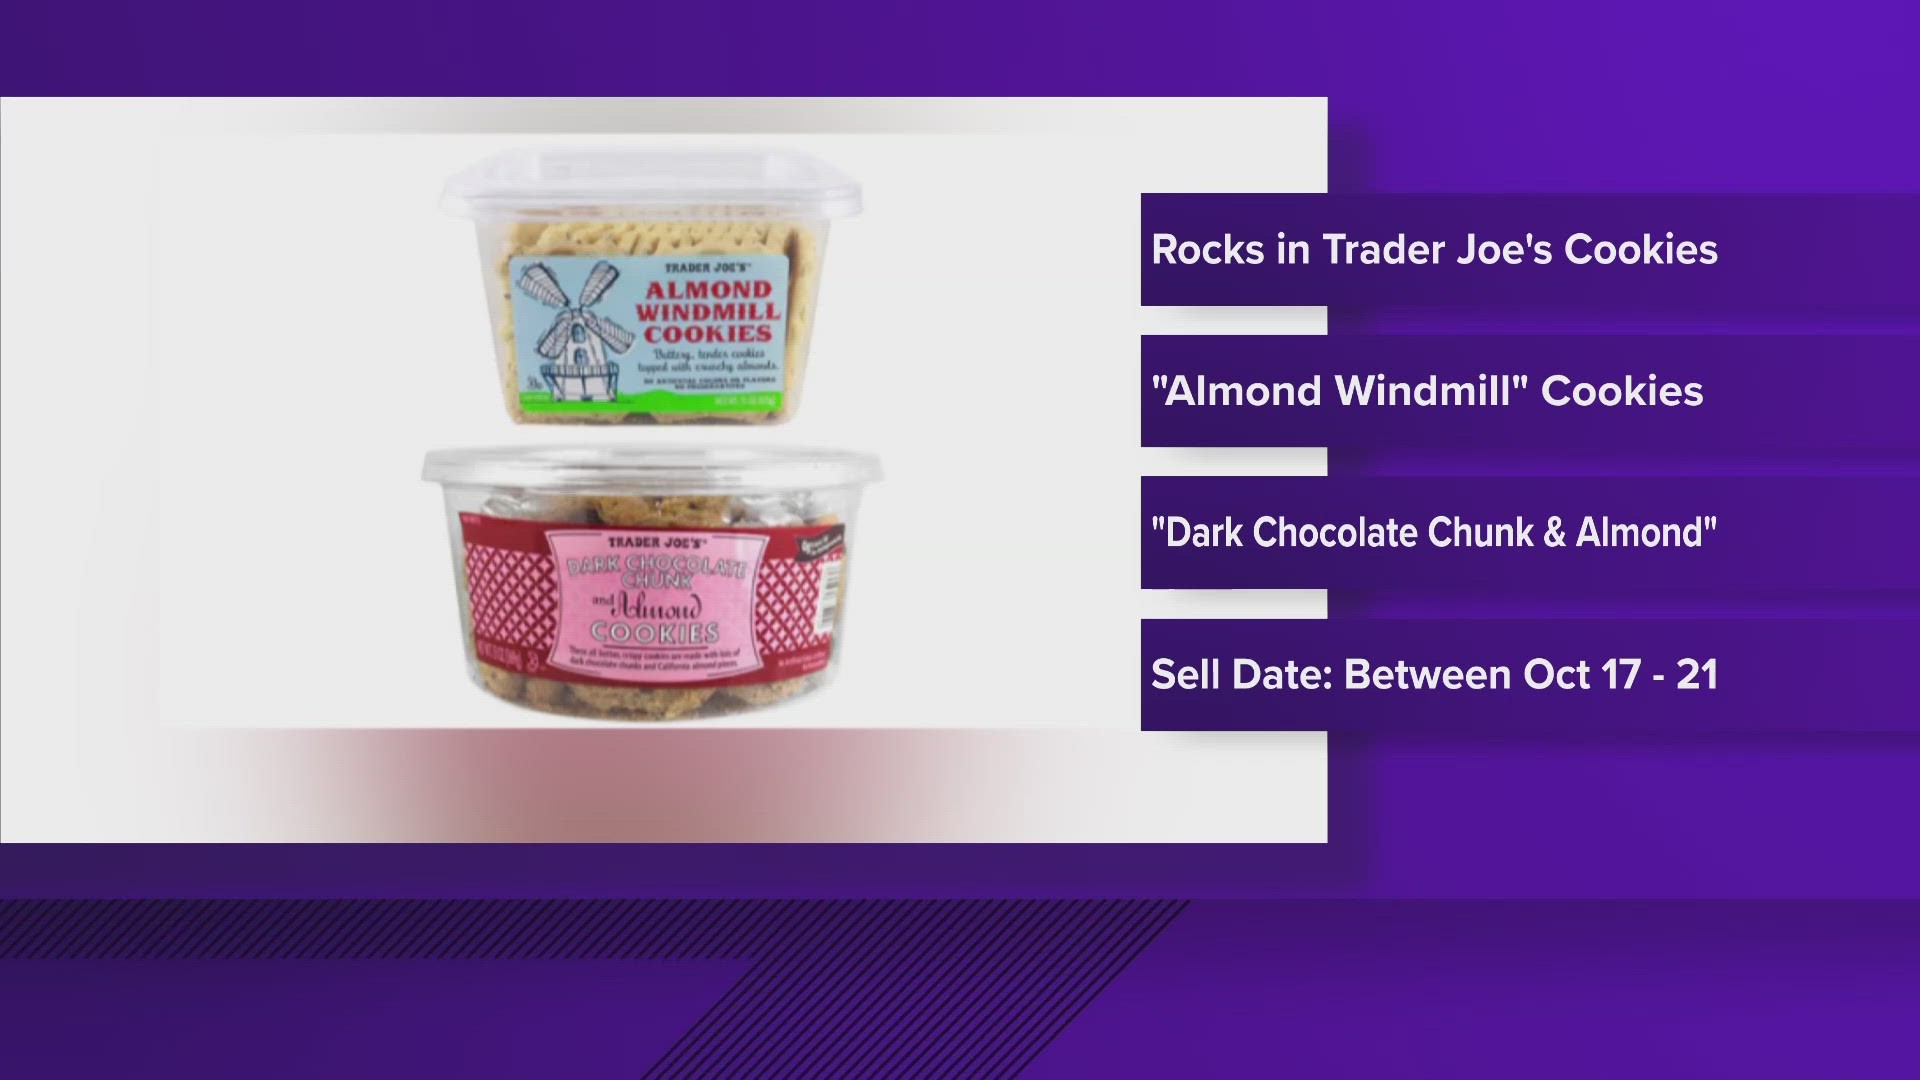 Sold between Oct. 17 and 21, "Almond Windmill" and "Dark Chocolate Chunk and Almond" are being recalled because they might have rocks in them.